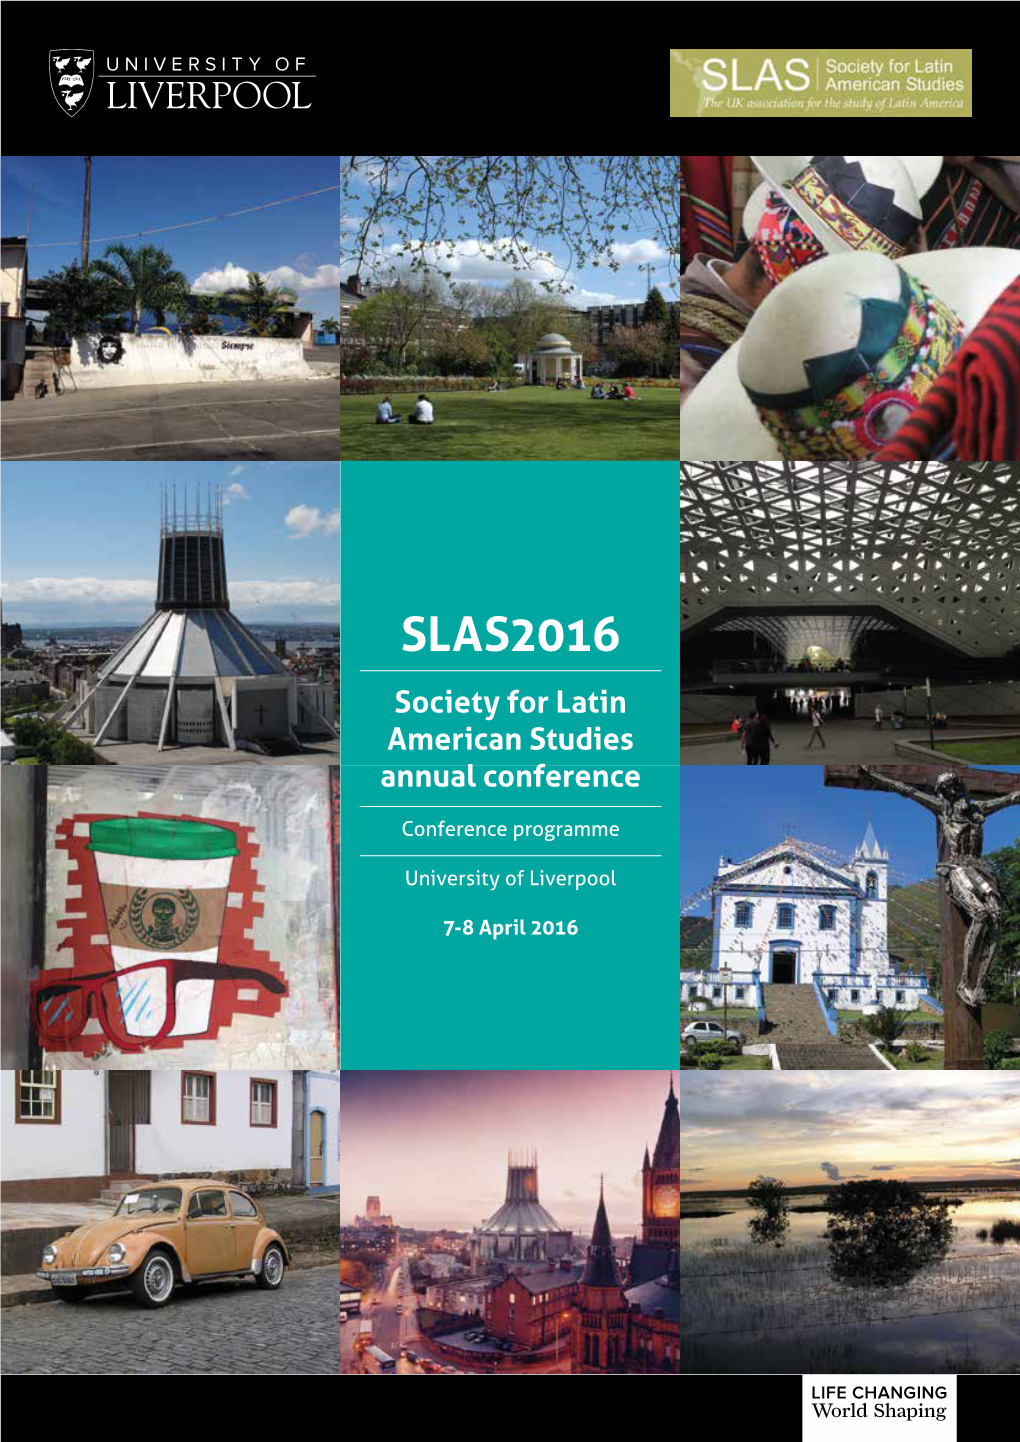 SLAS2016 Society for Latin American Studies Annual Conference